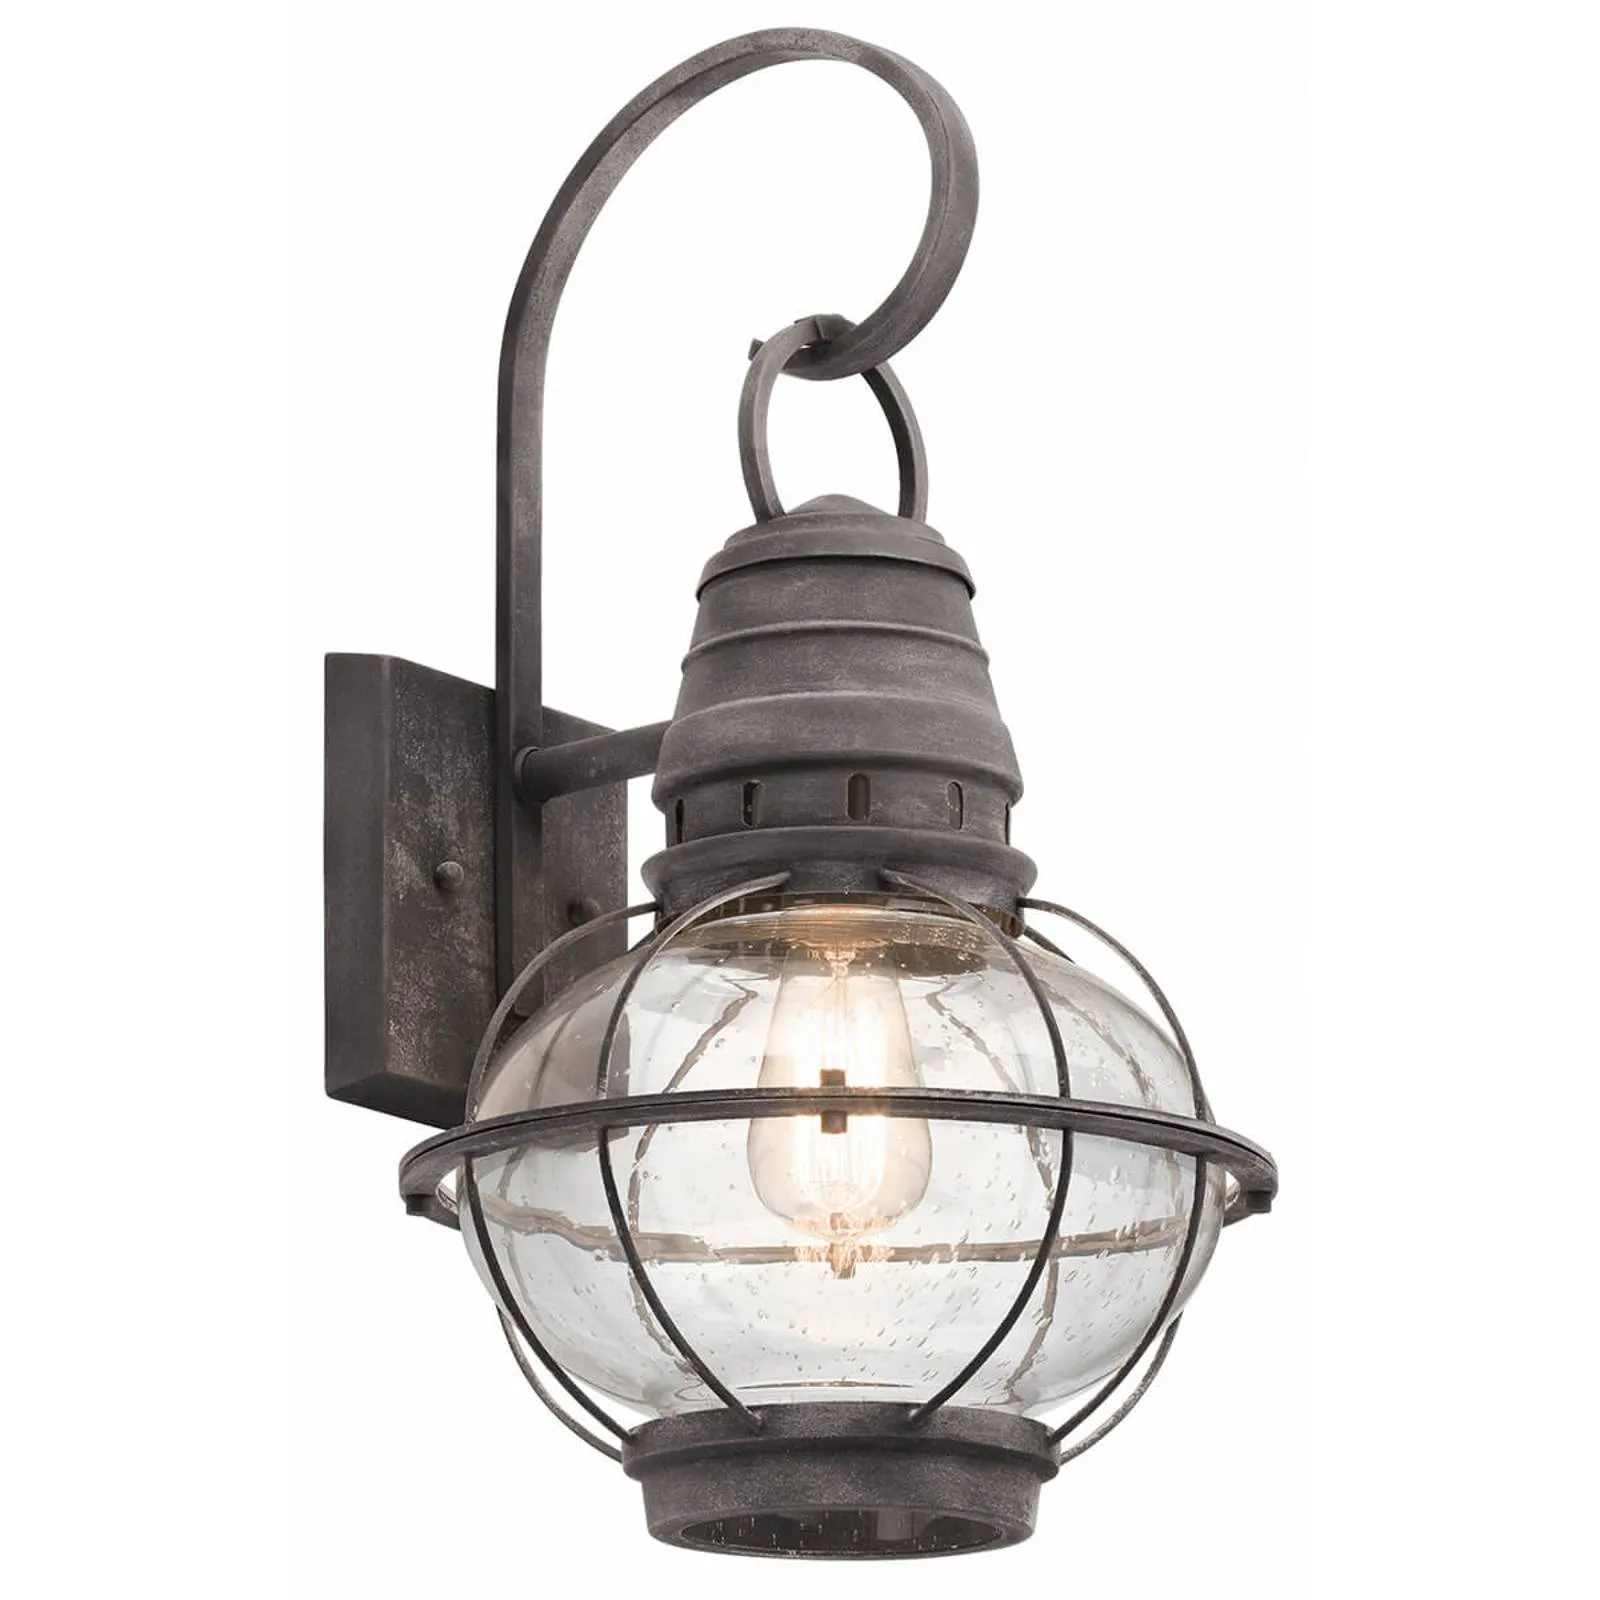 Large Bridge Point wall lantern for outdoors